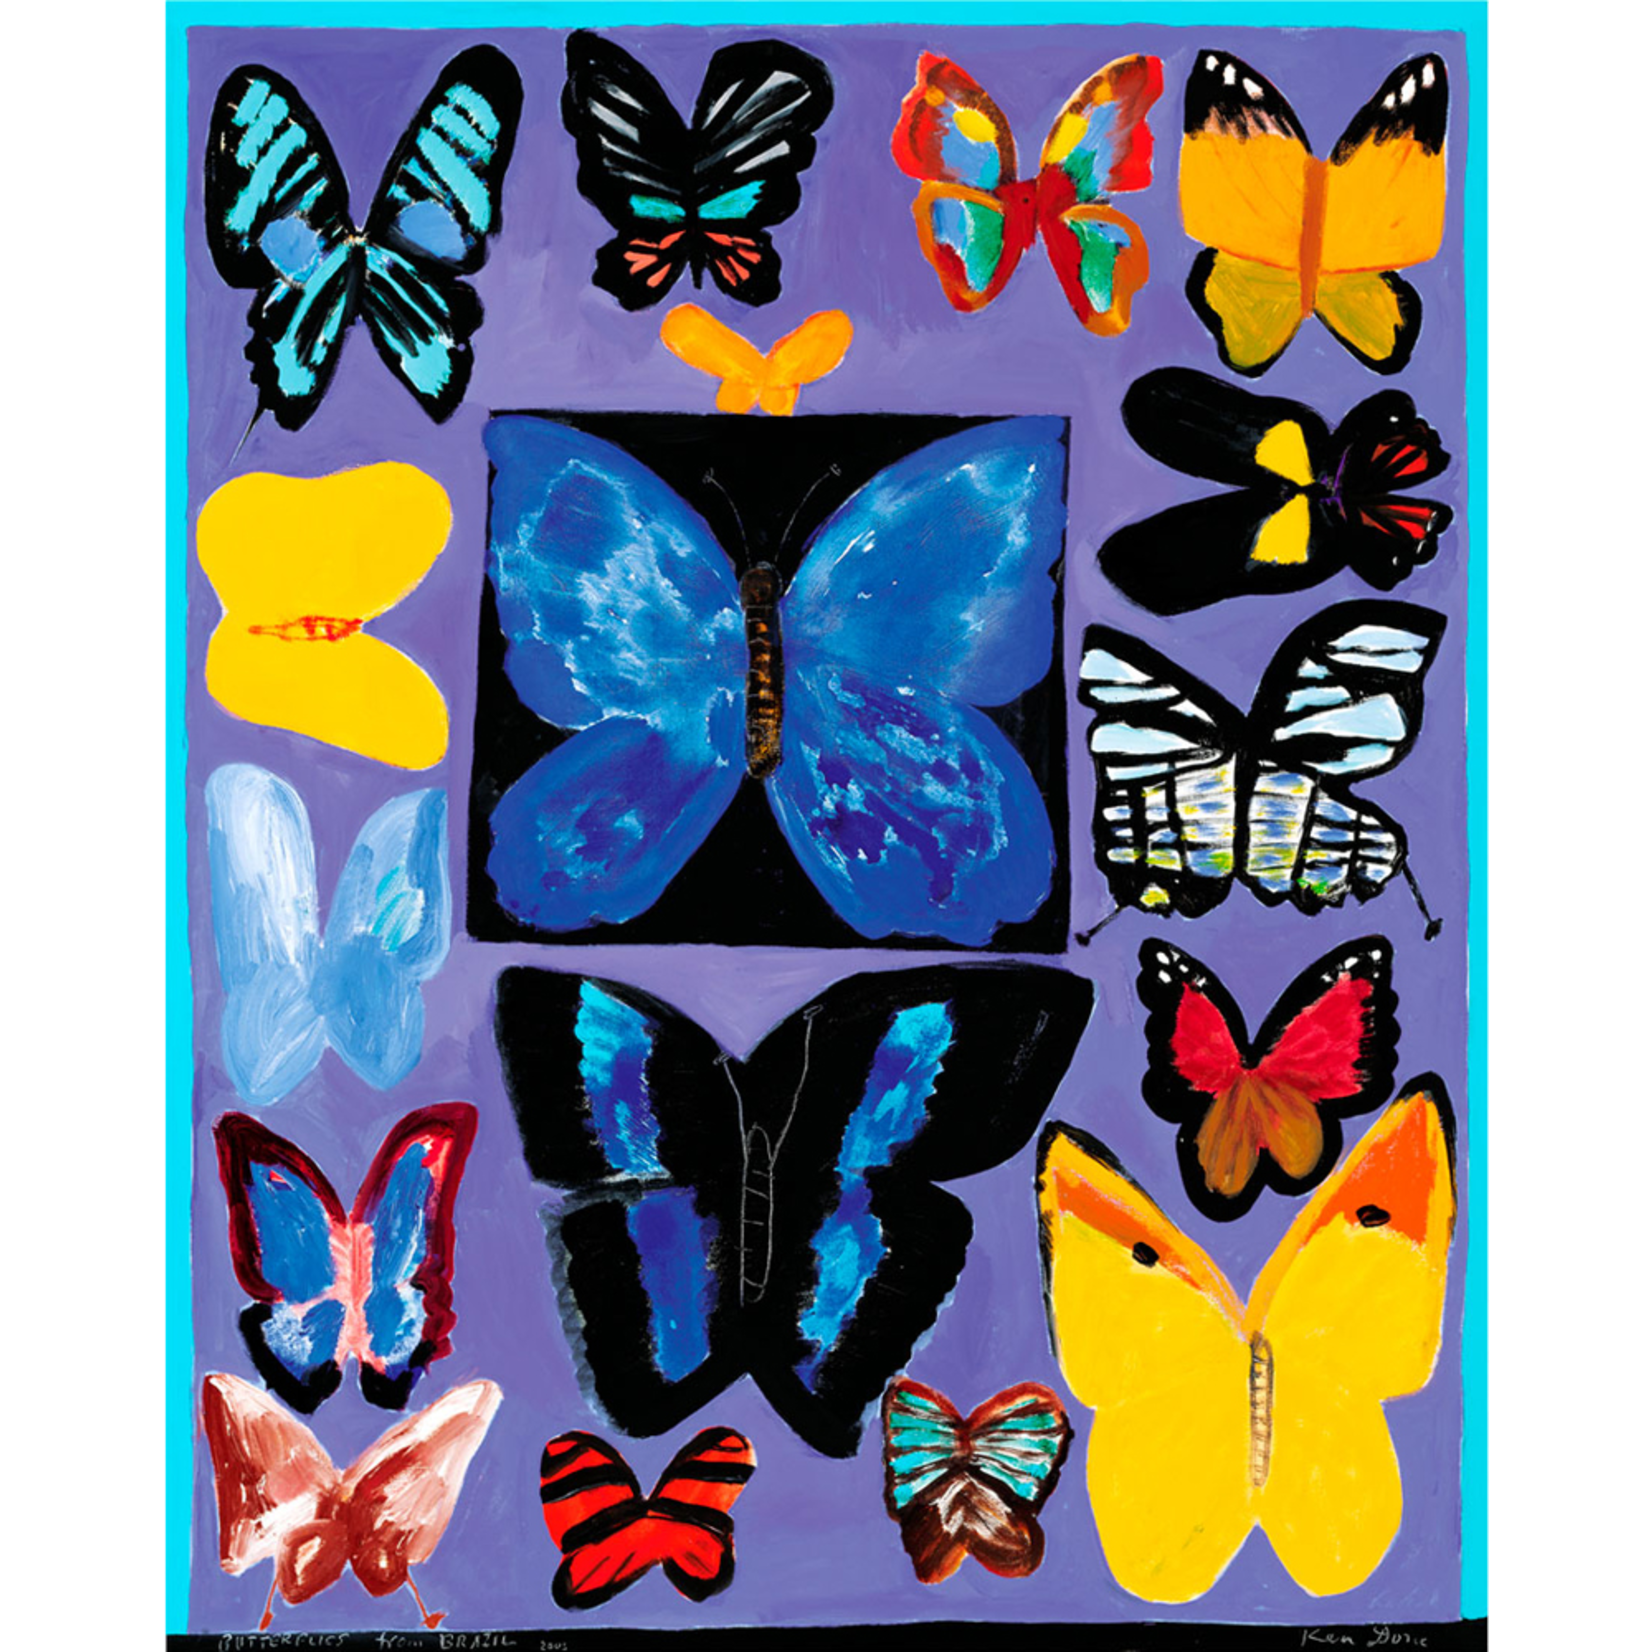 Limited Edition Prints Butterflies from Brazil, 2003